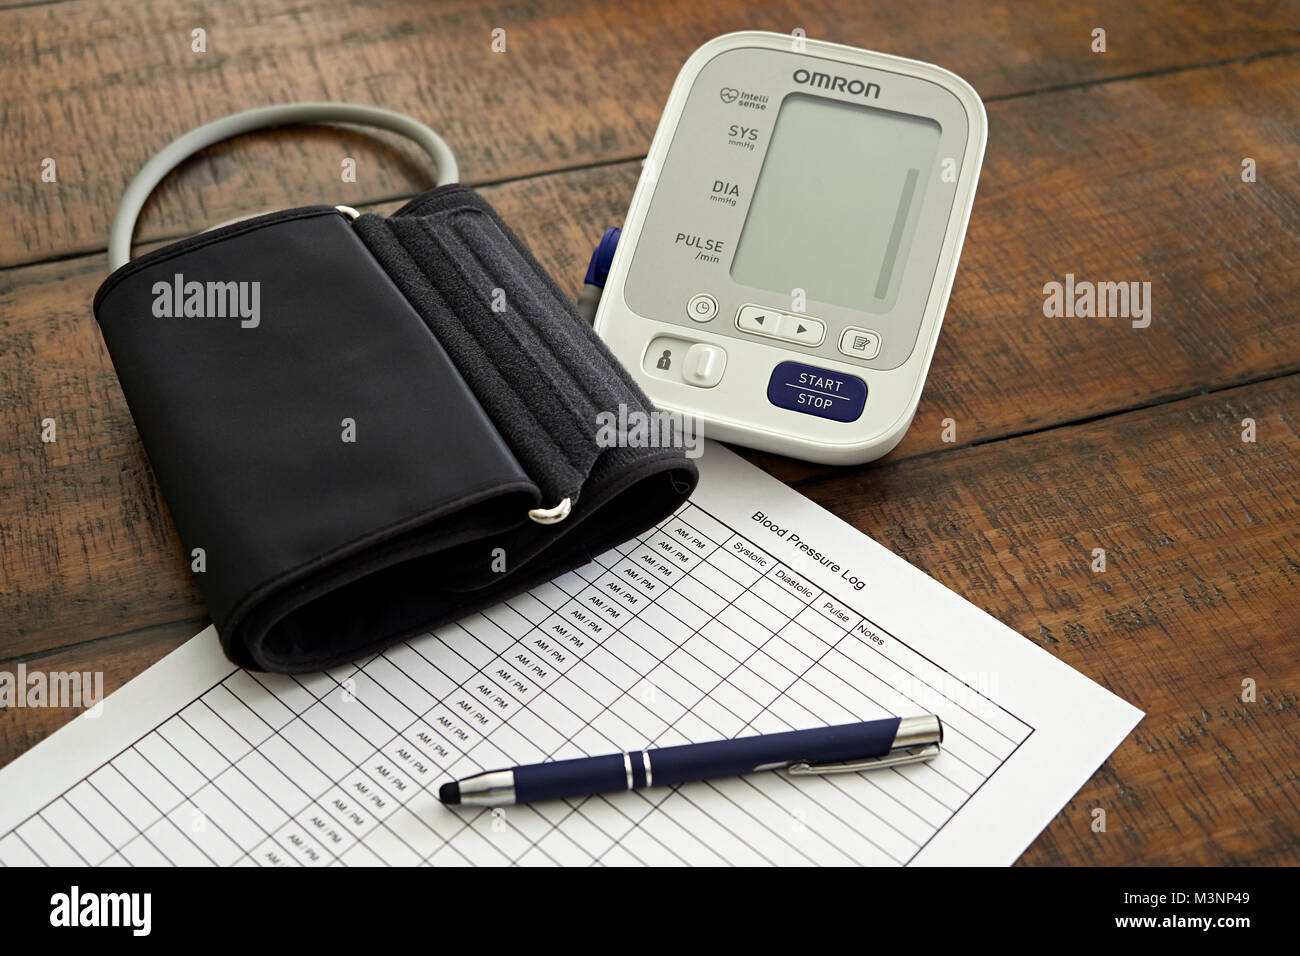 Sphygmomanometer or blood pressure monitor, cuff, and chart ready to monitor heart health.  Concept of healthy lifestyle. Stock Photo